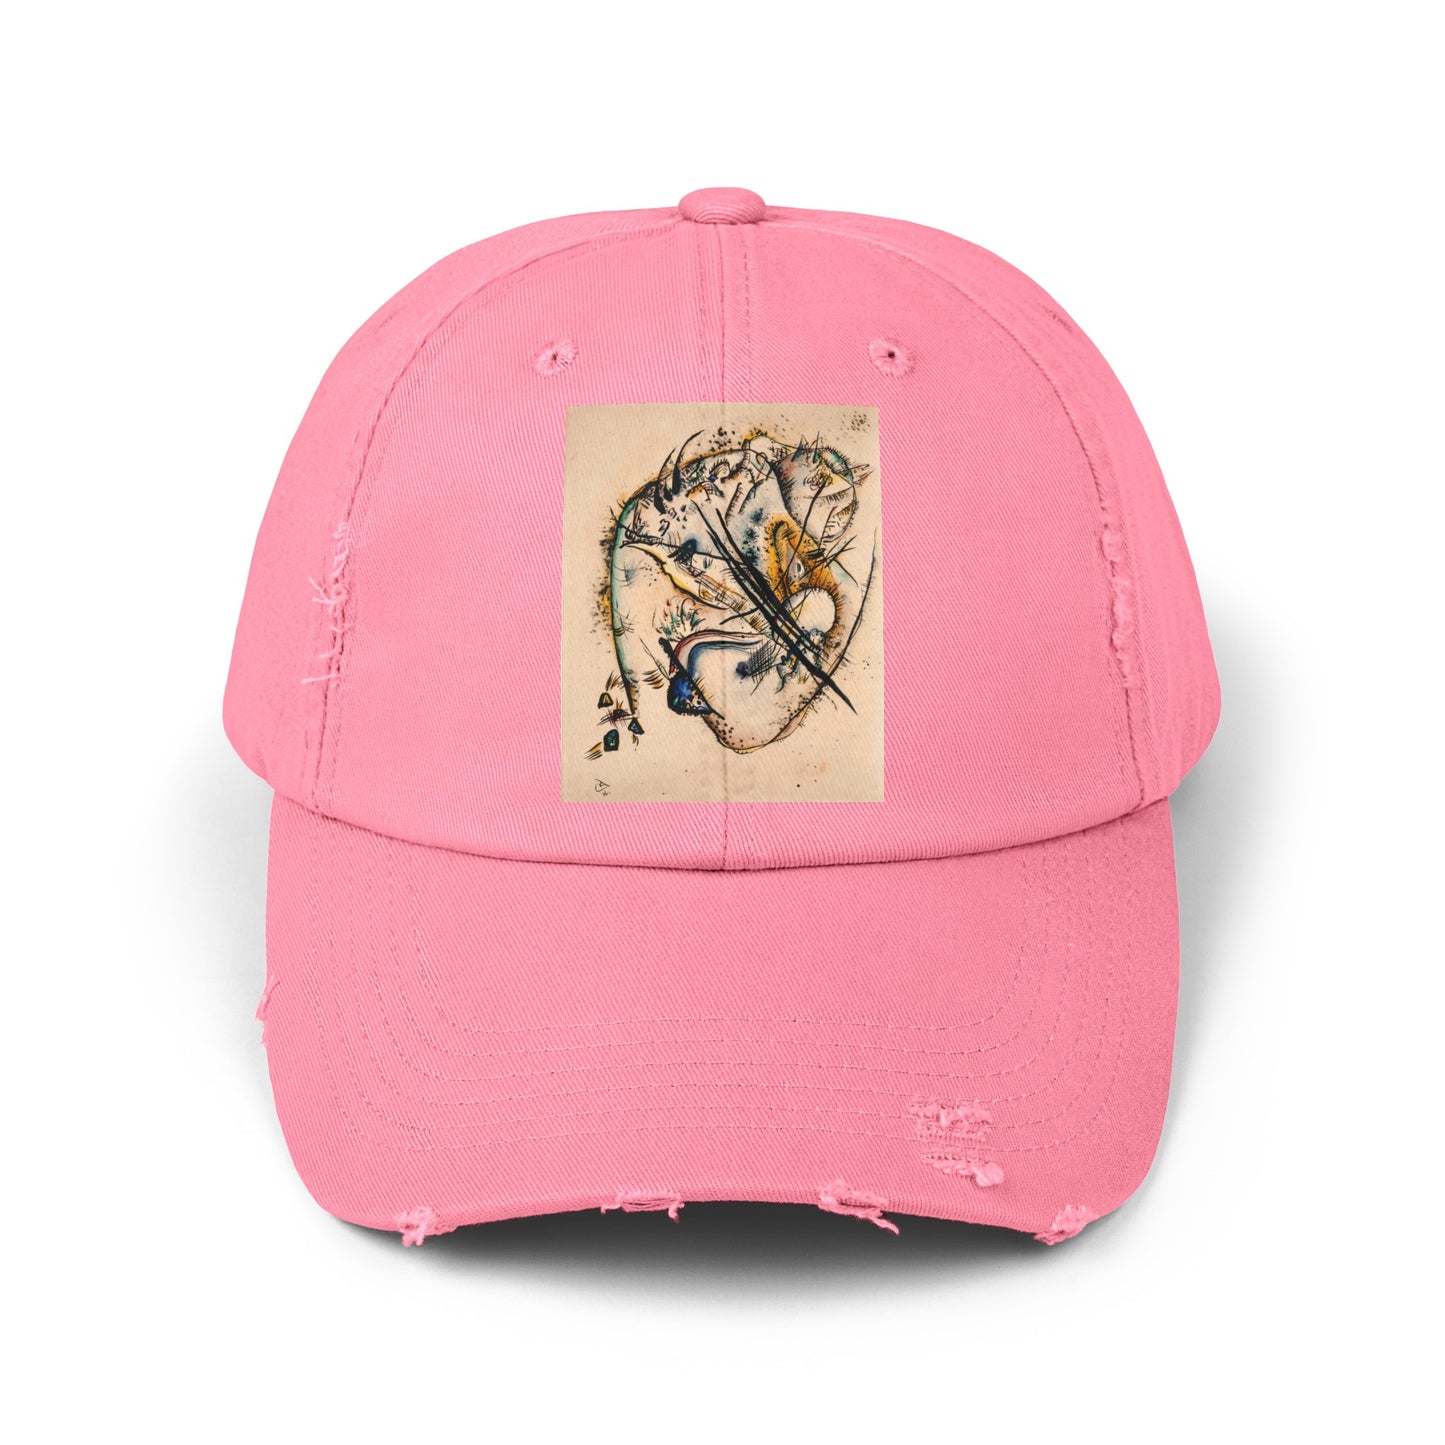 a pink hat with a picture of a bird on it